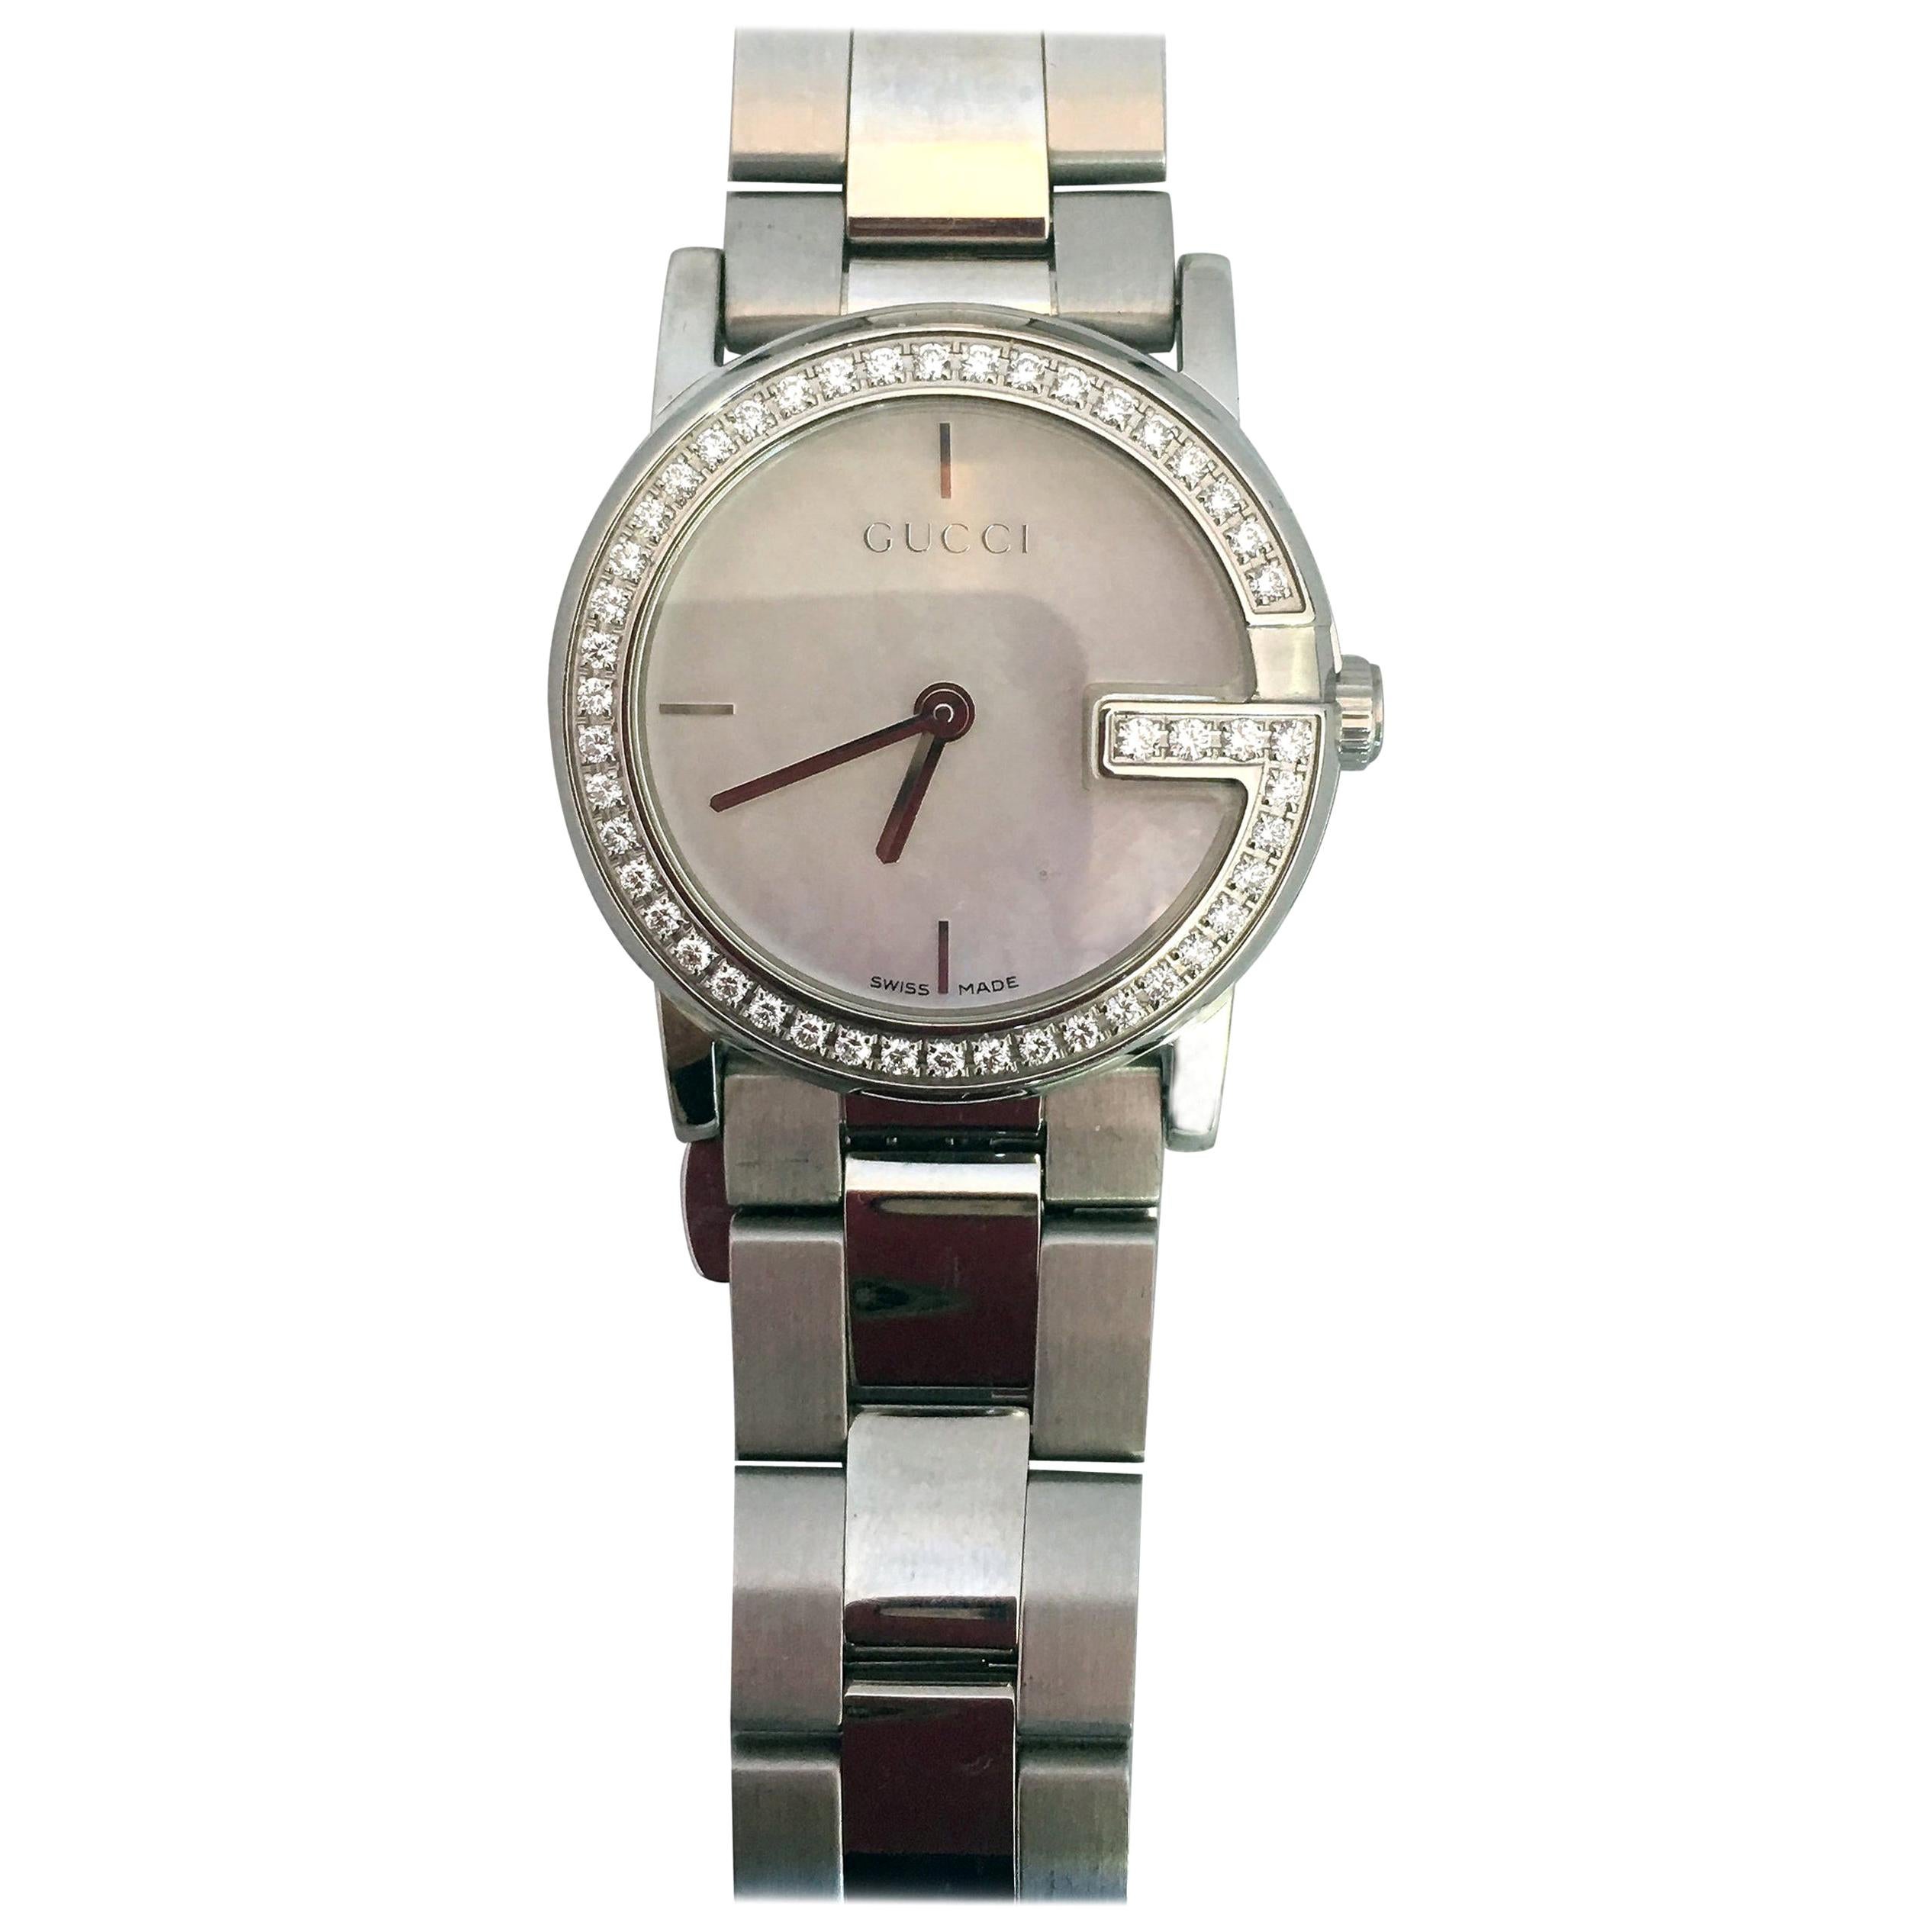 Gucci Stainless Steel Mother of Pearl Face Diamond Encrusted "101L" Watch